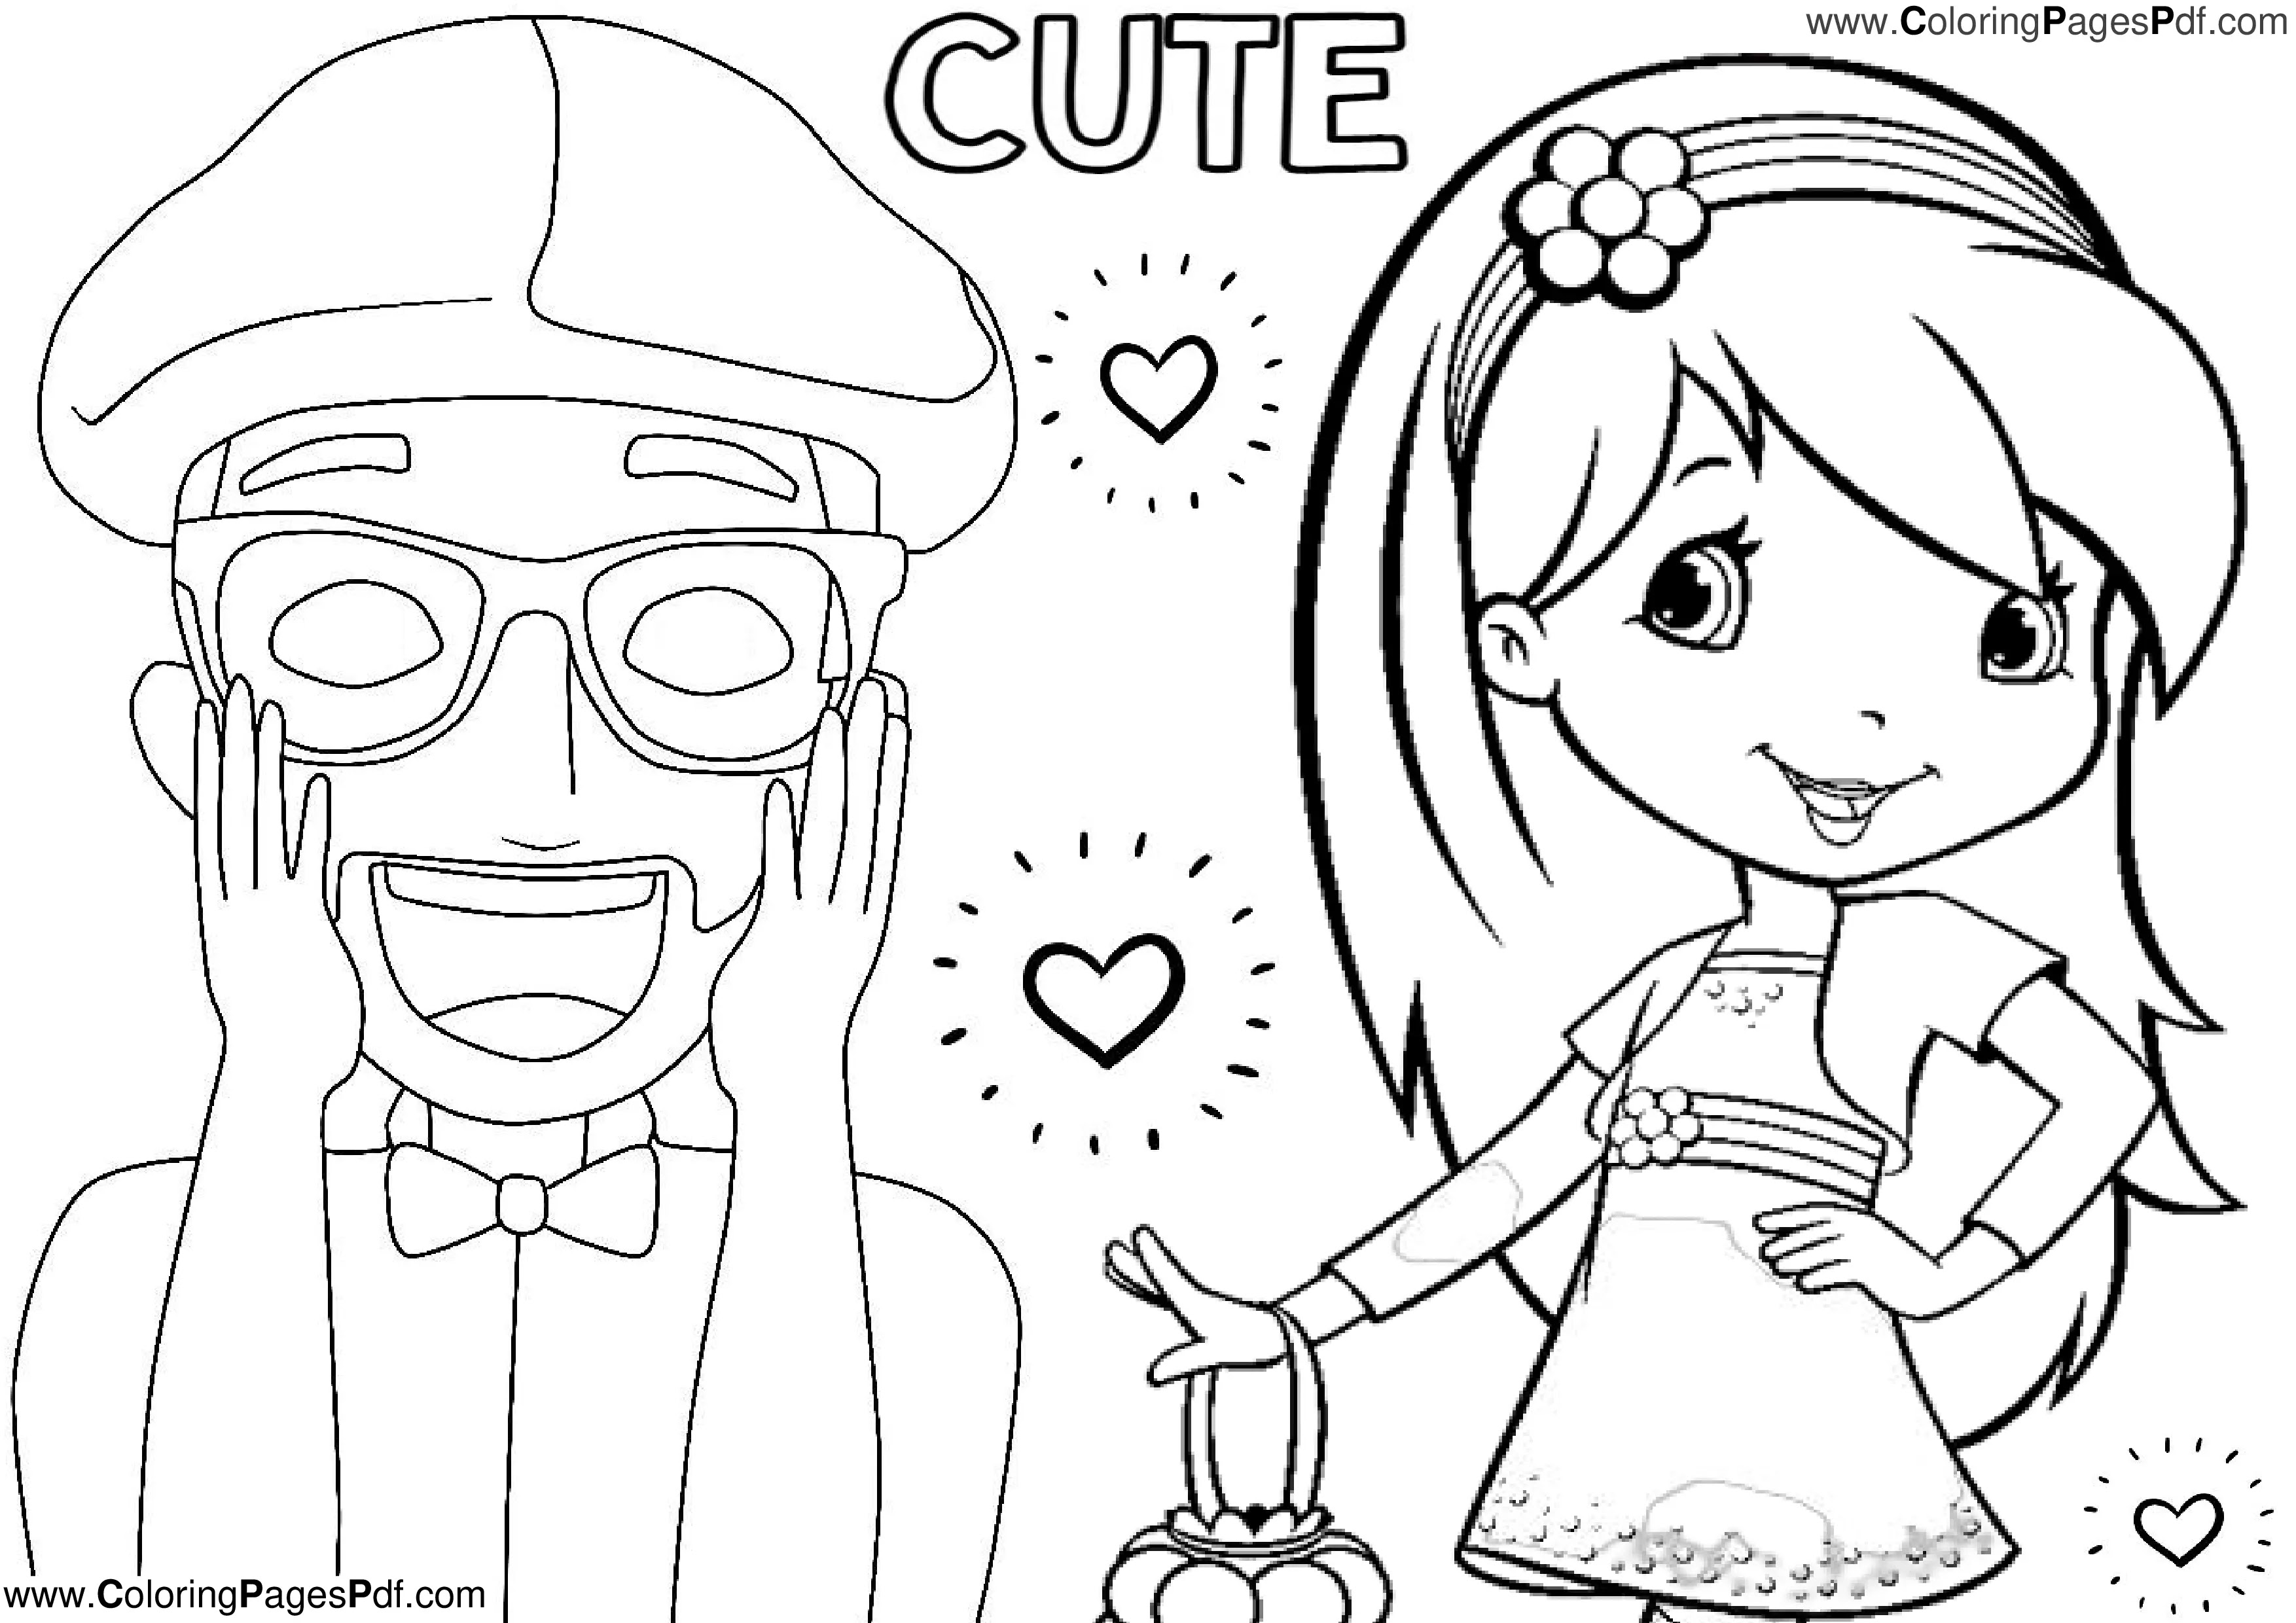 Blippi coloring pages for girls